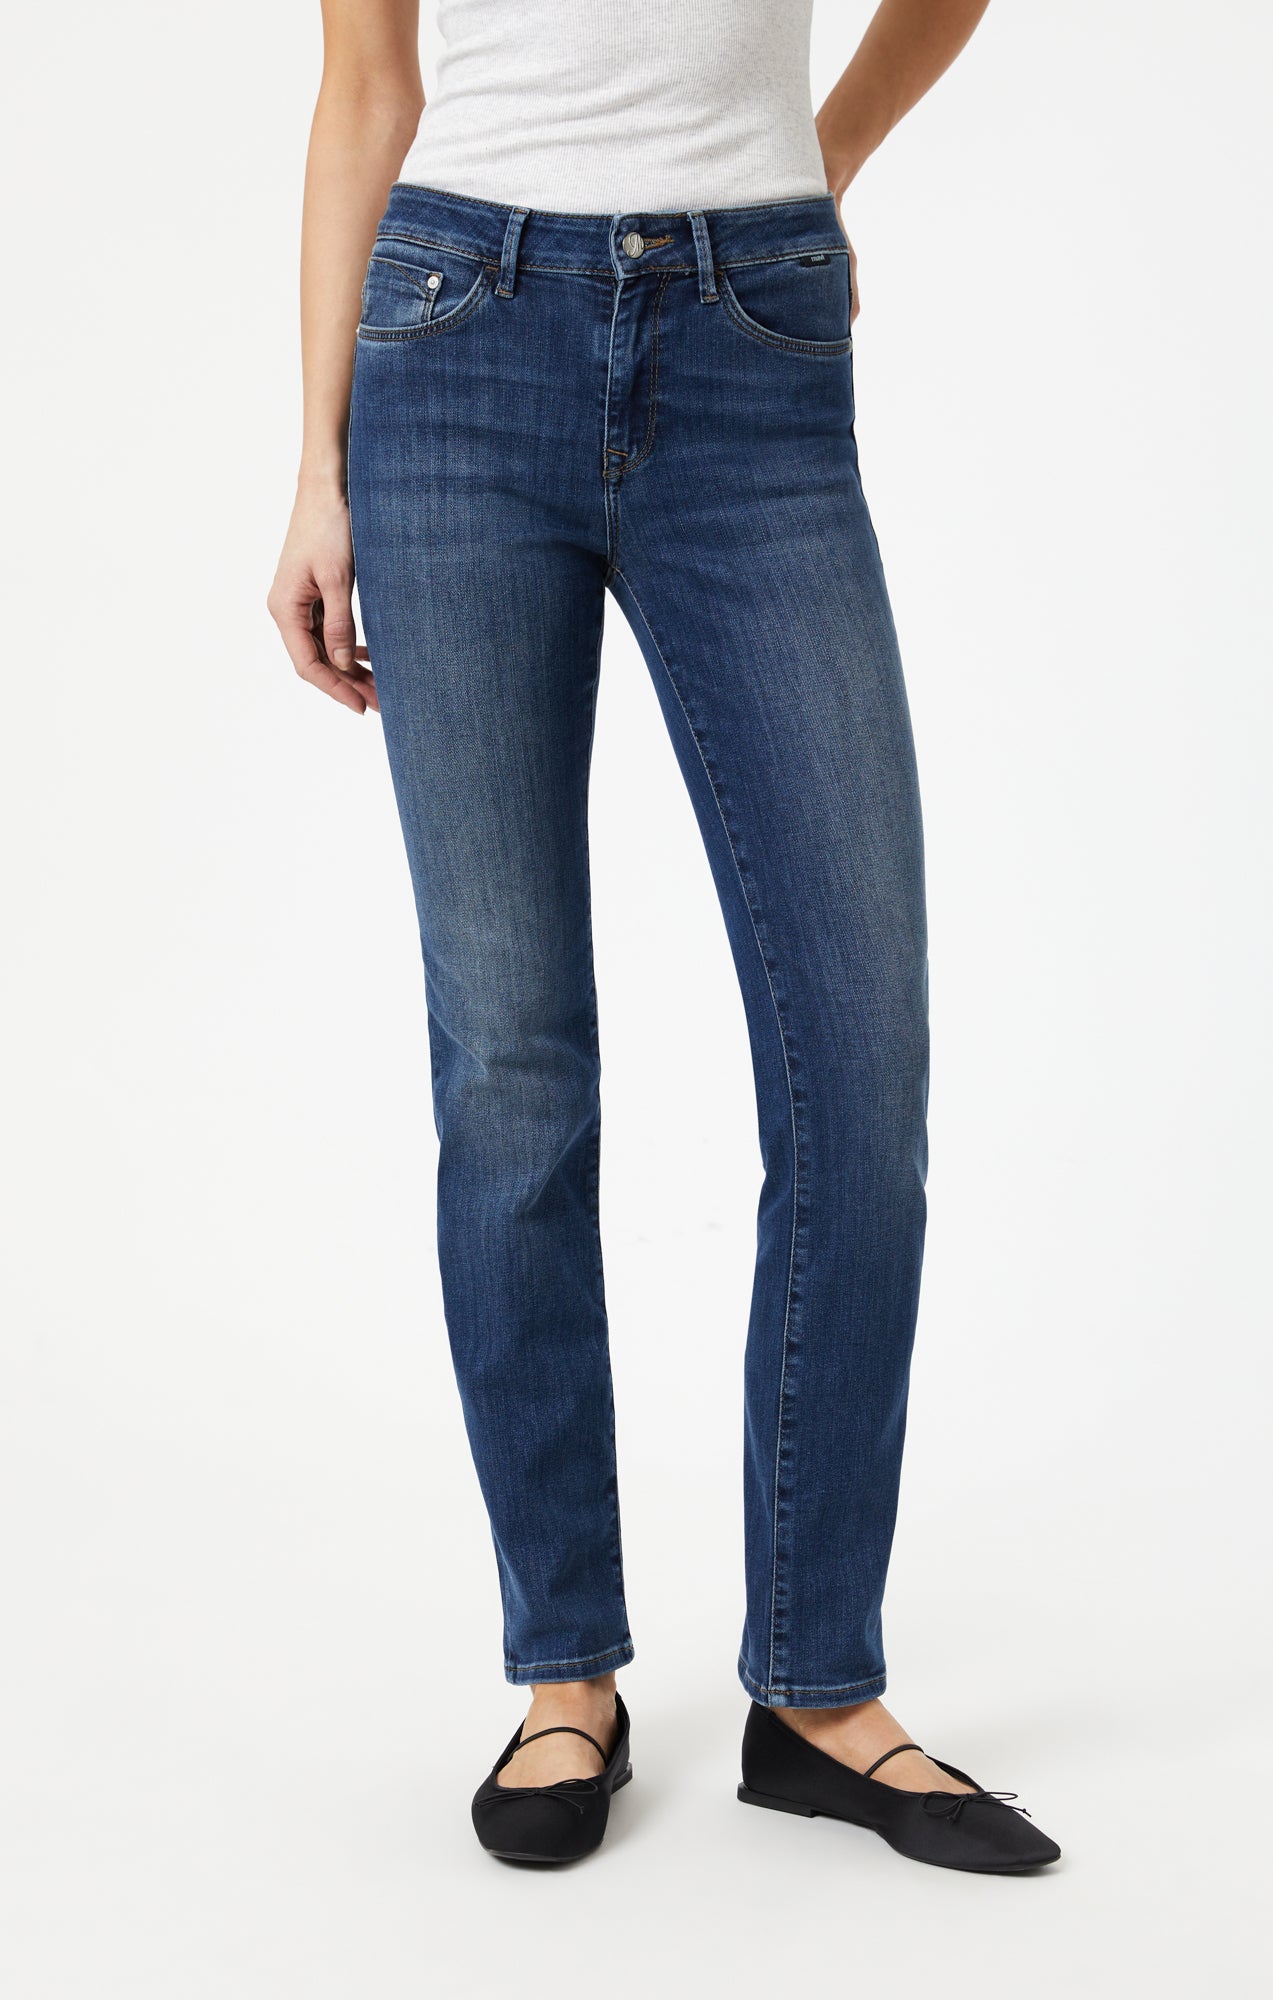 Blue Women Denim Jeans, Size: 28 - 38 inch at Rs 280/piece in New